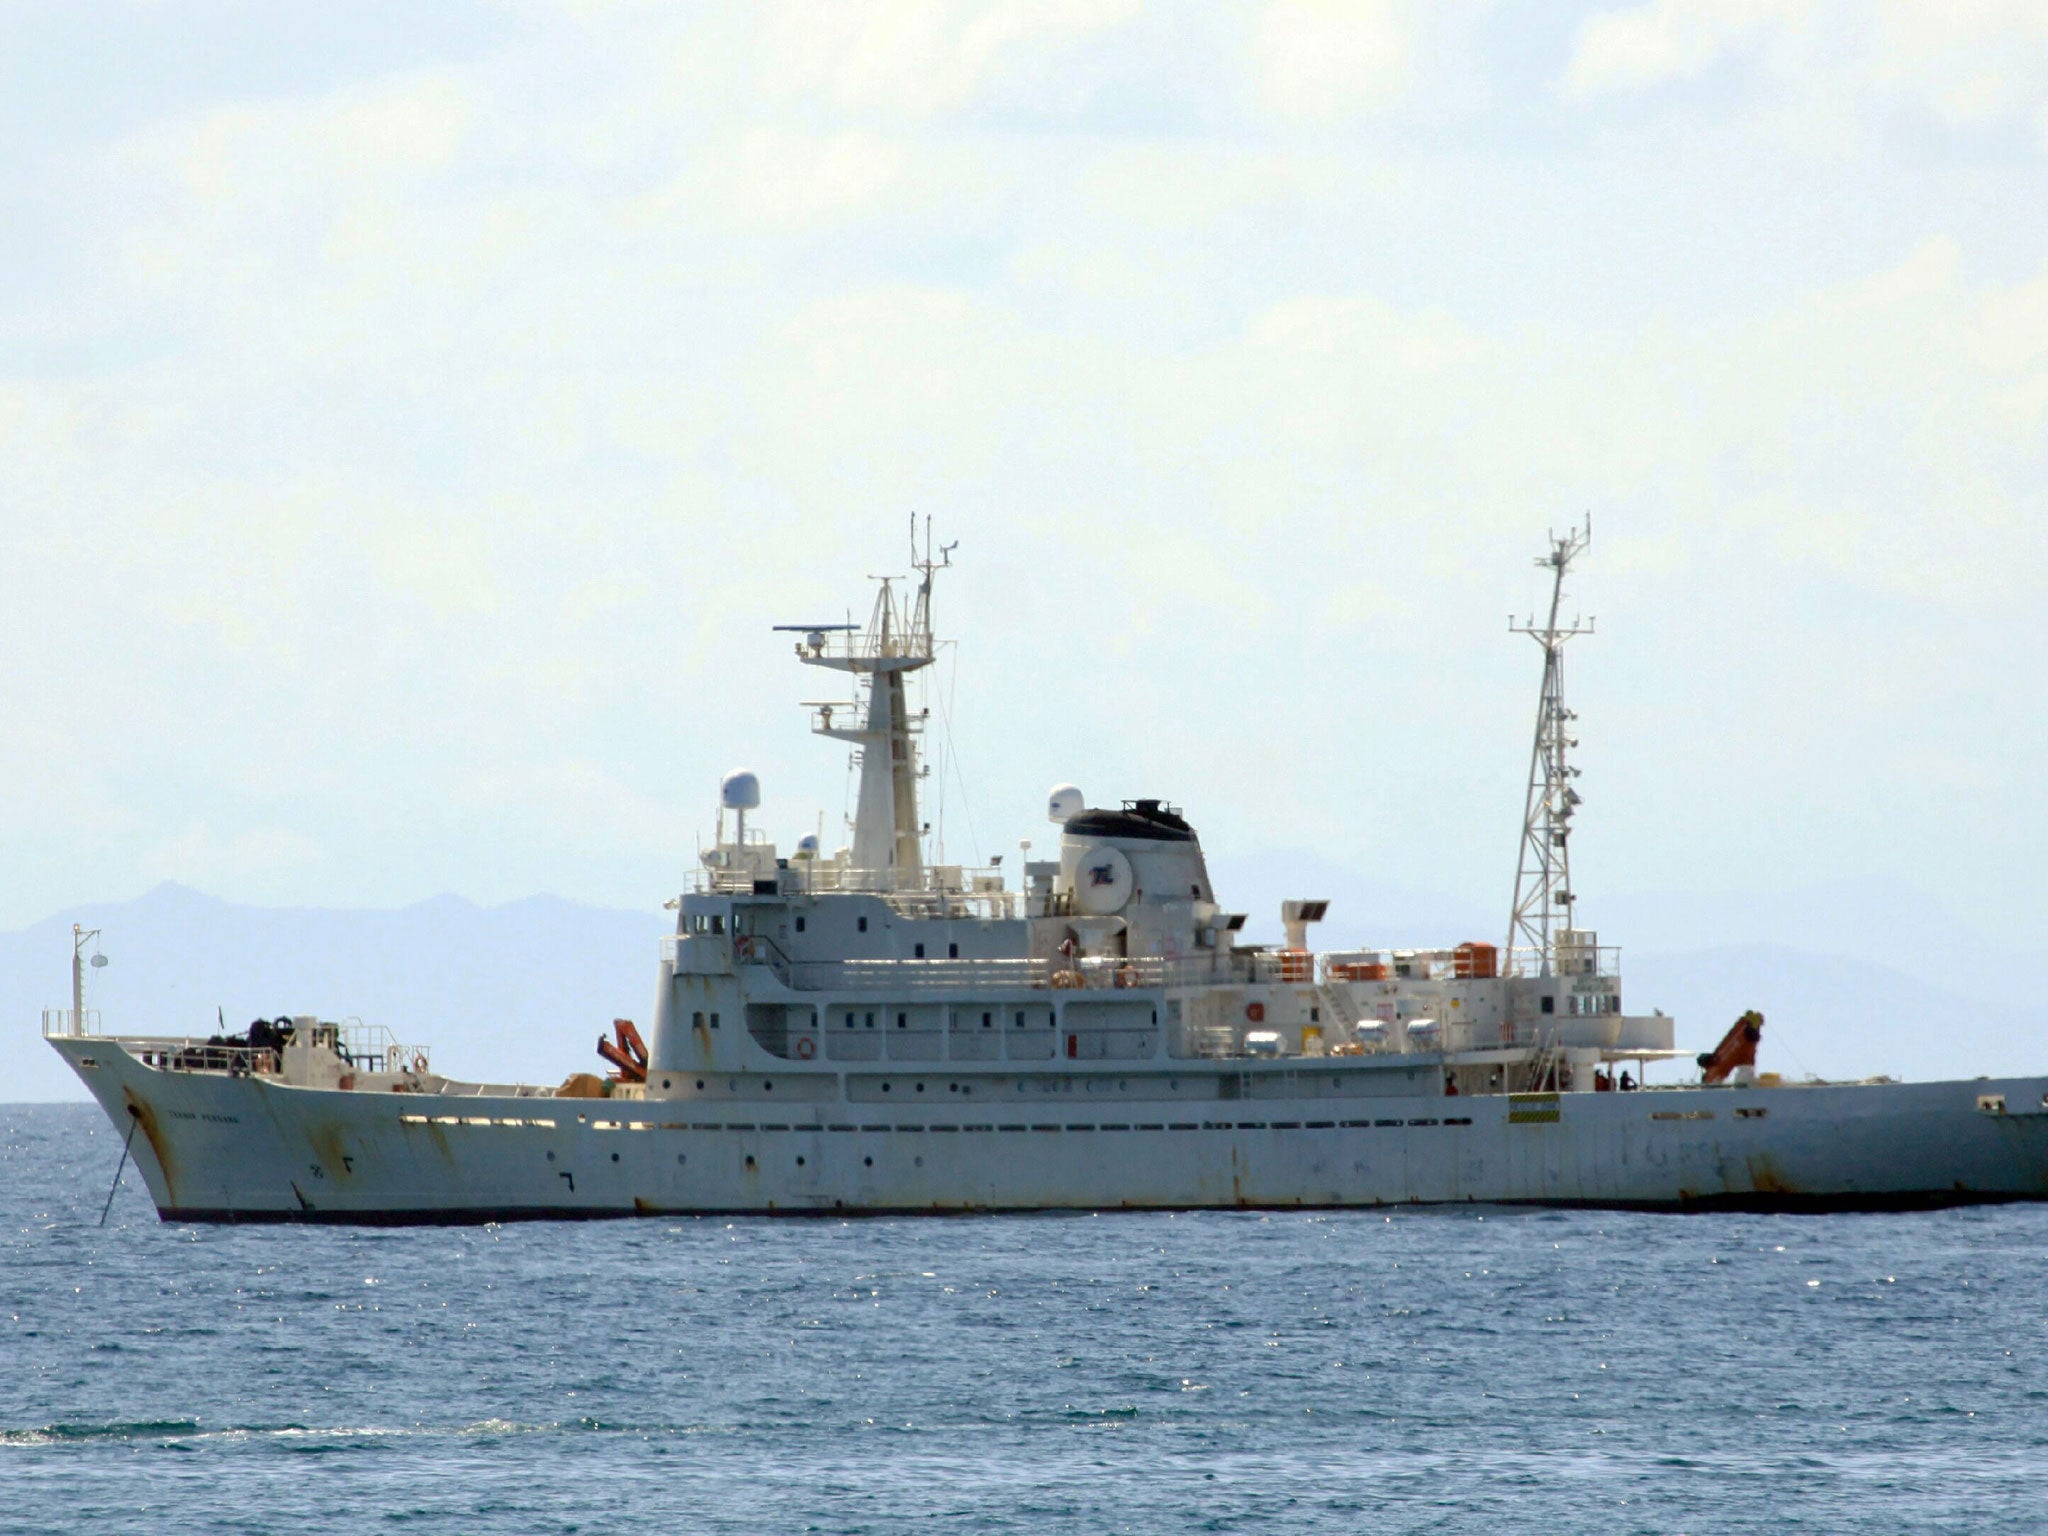 The Teknik Perdana was looking for oil off the coast of Guyana